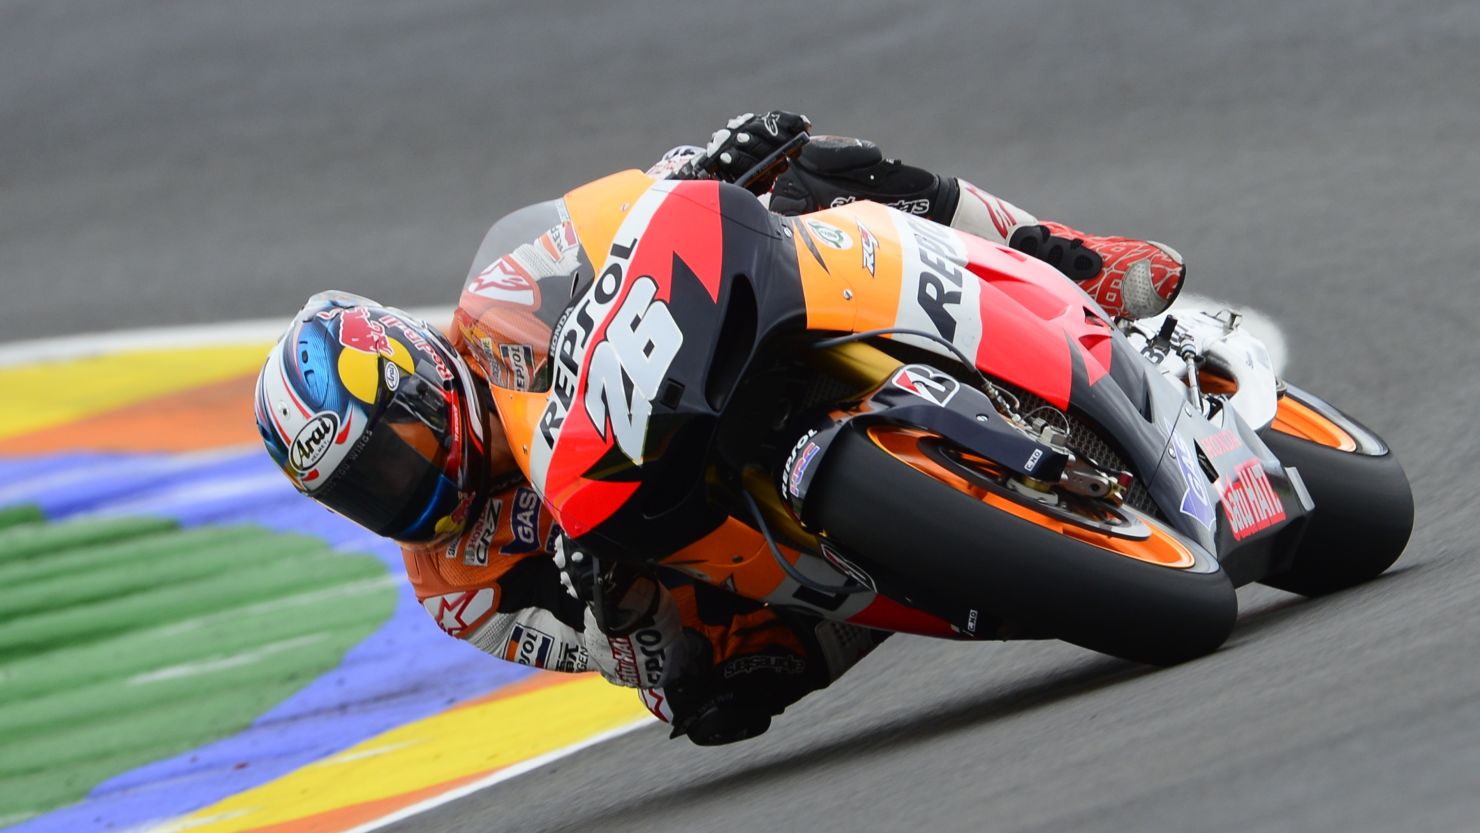 Dani Pedrosa won't be appearing in Argentina next year after the race at Termas de Rio Hondo  was canceled.